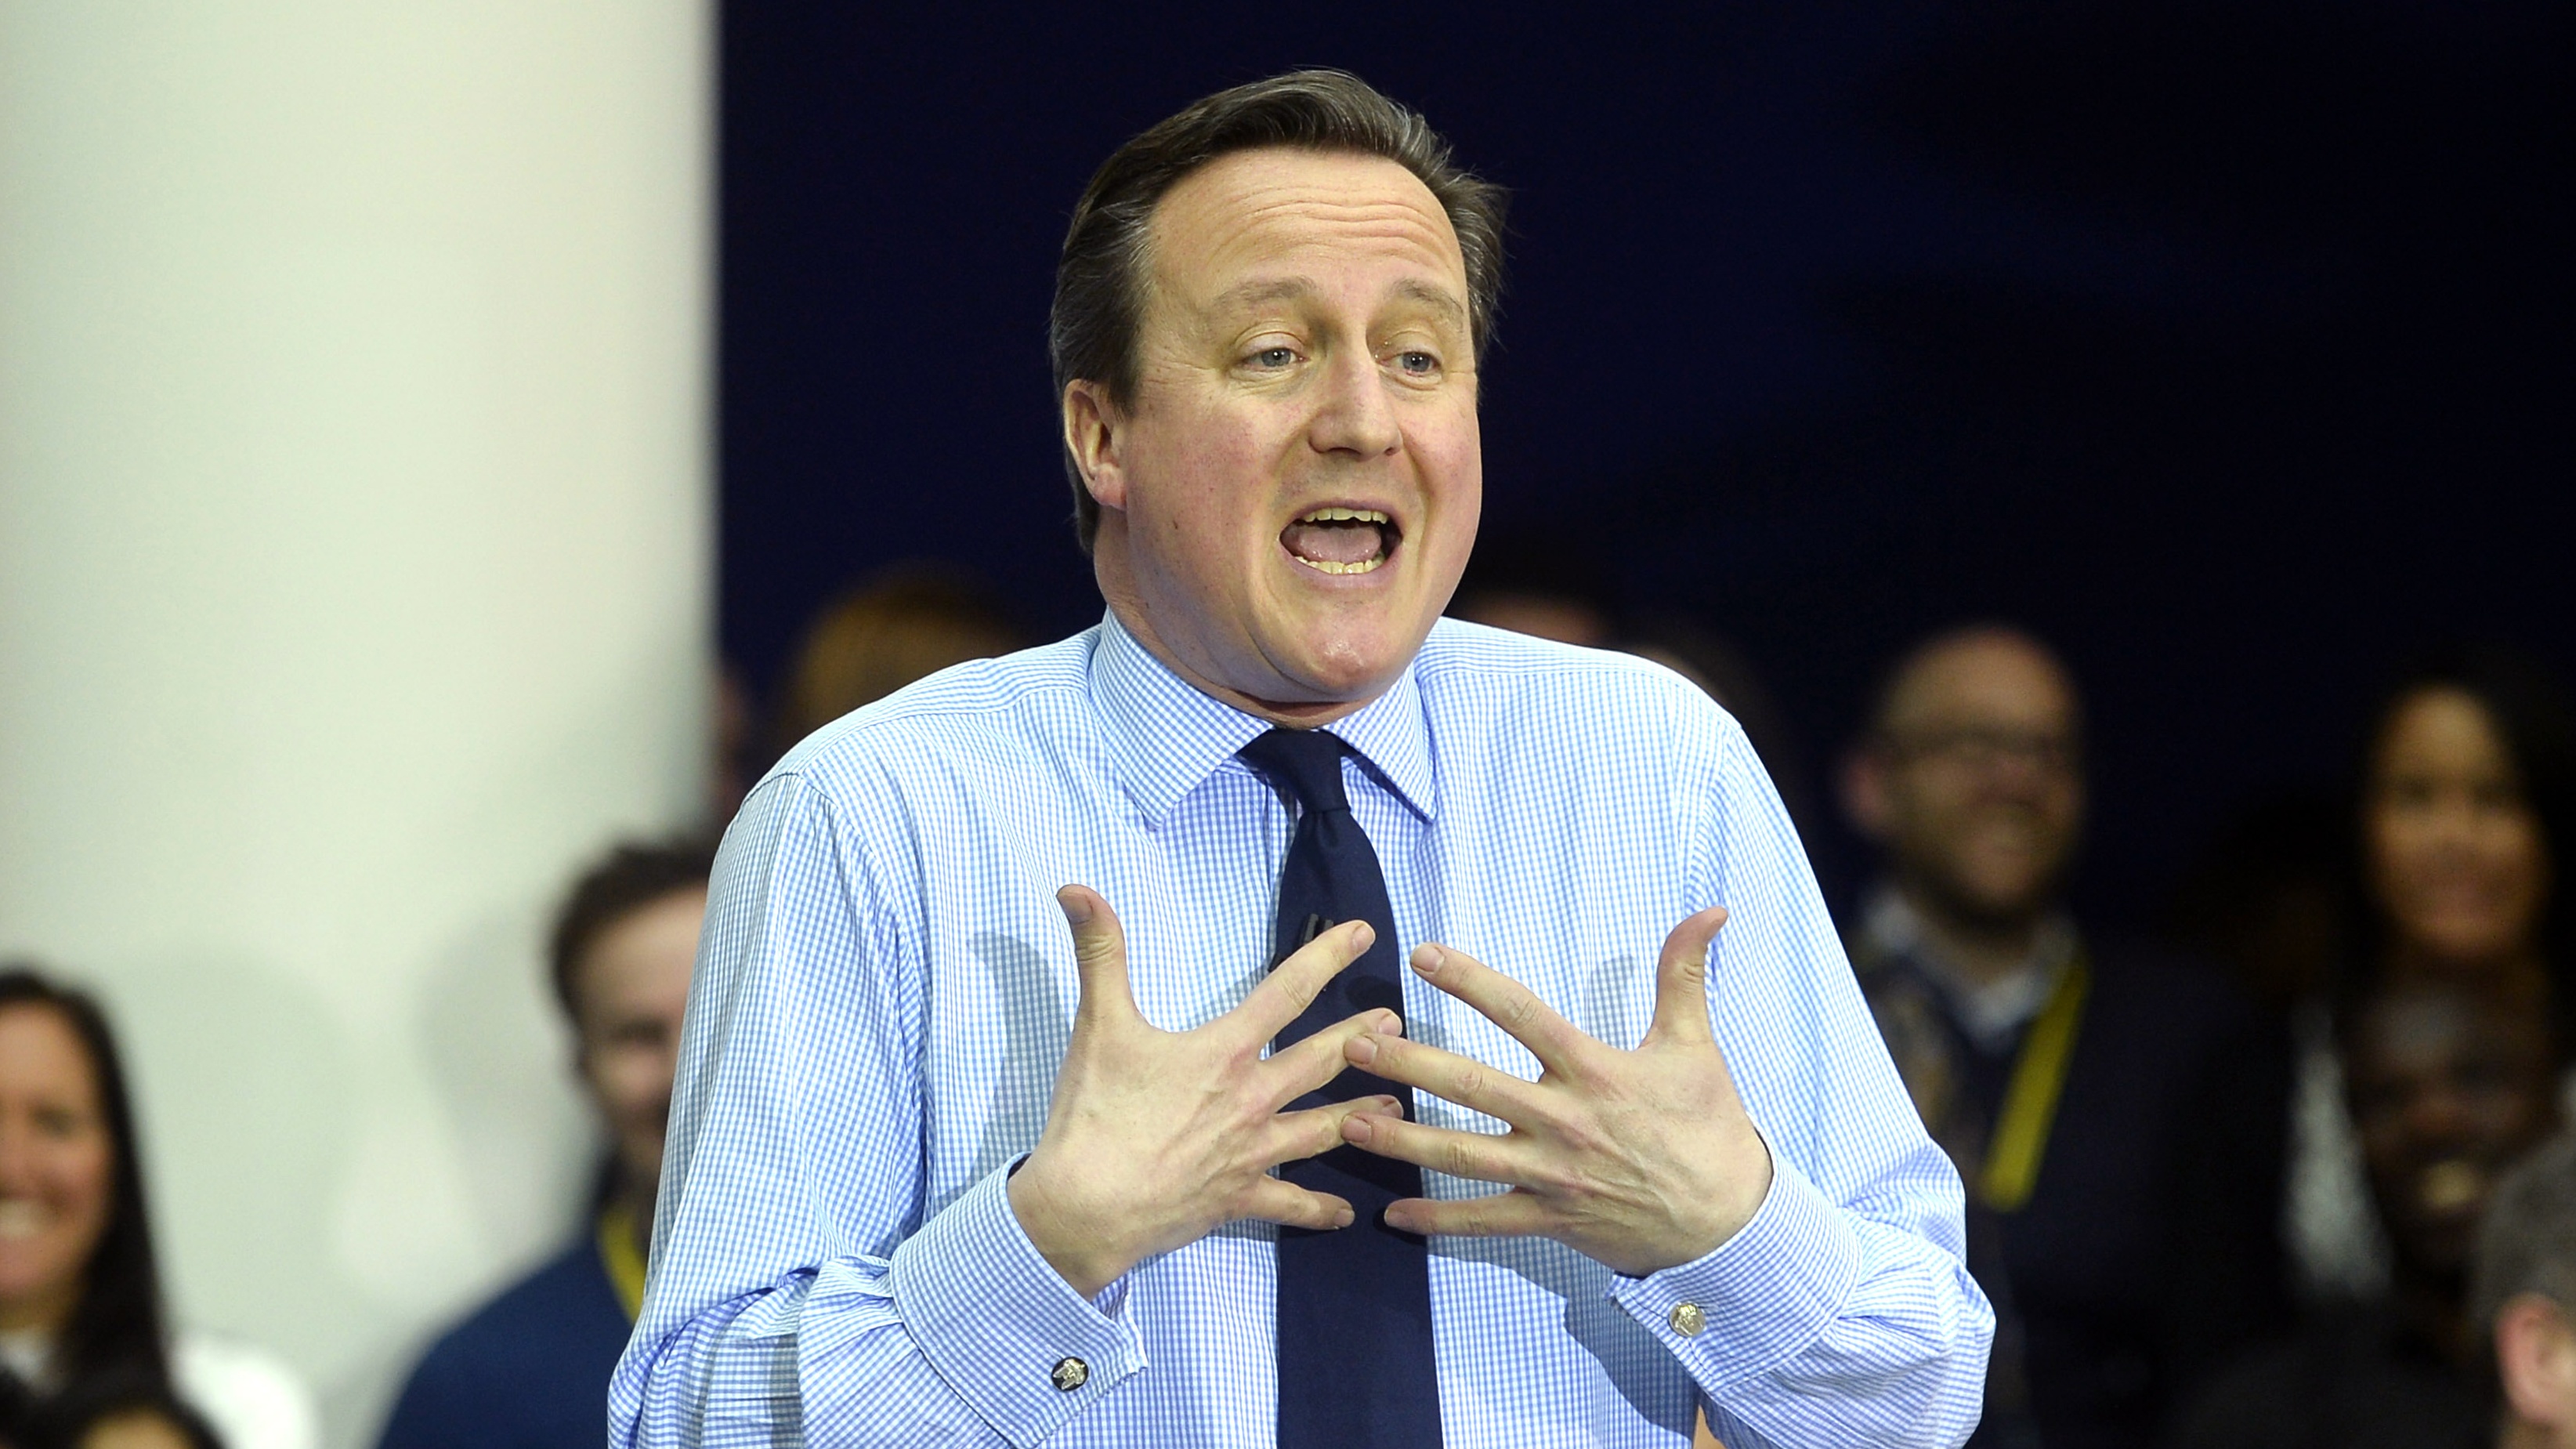 David Cameron is facing a government probe into his lobbying for Greensill Capital